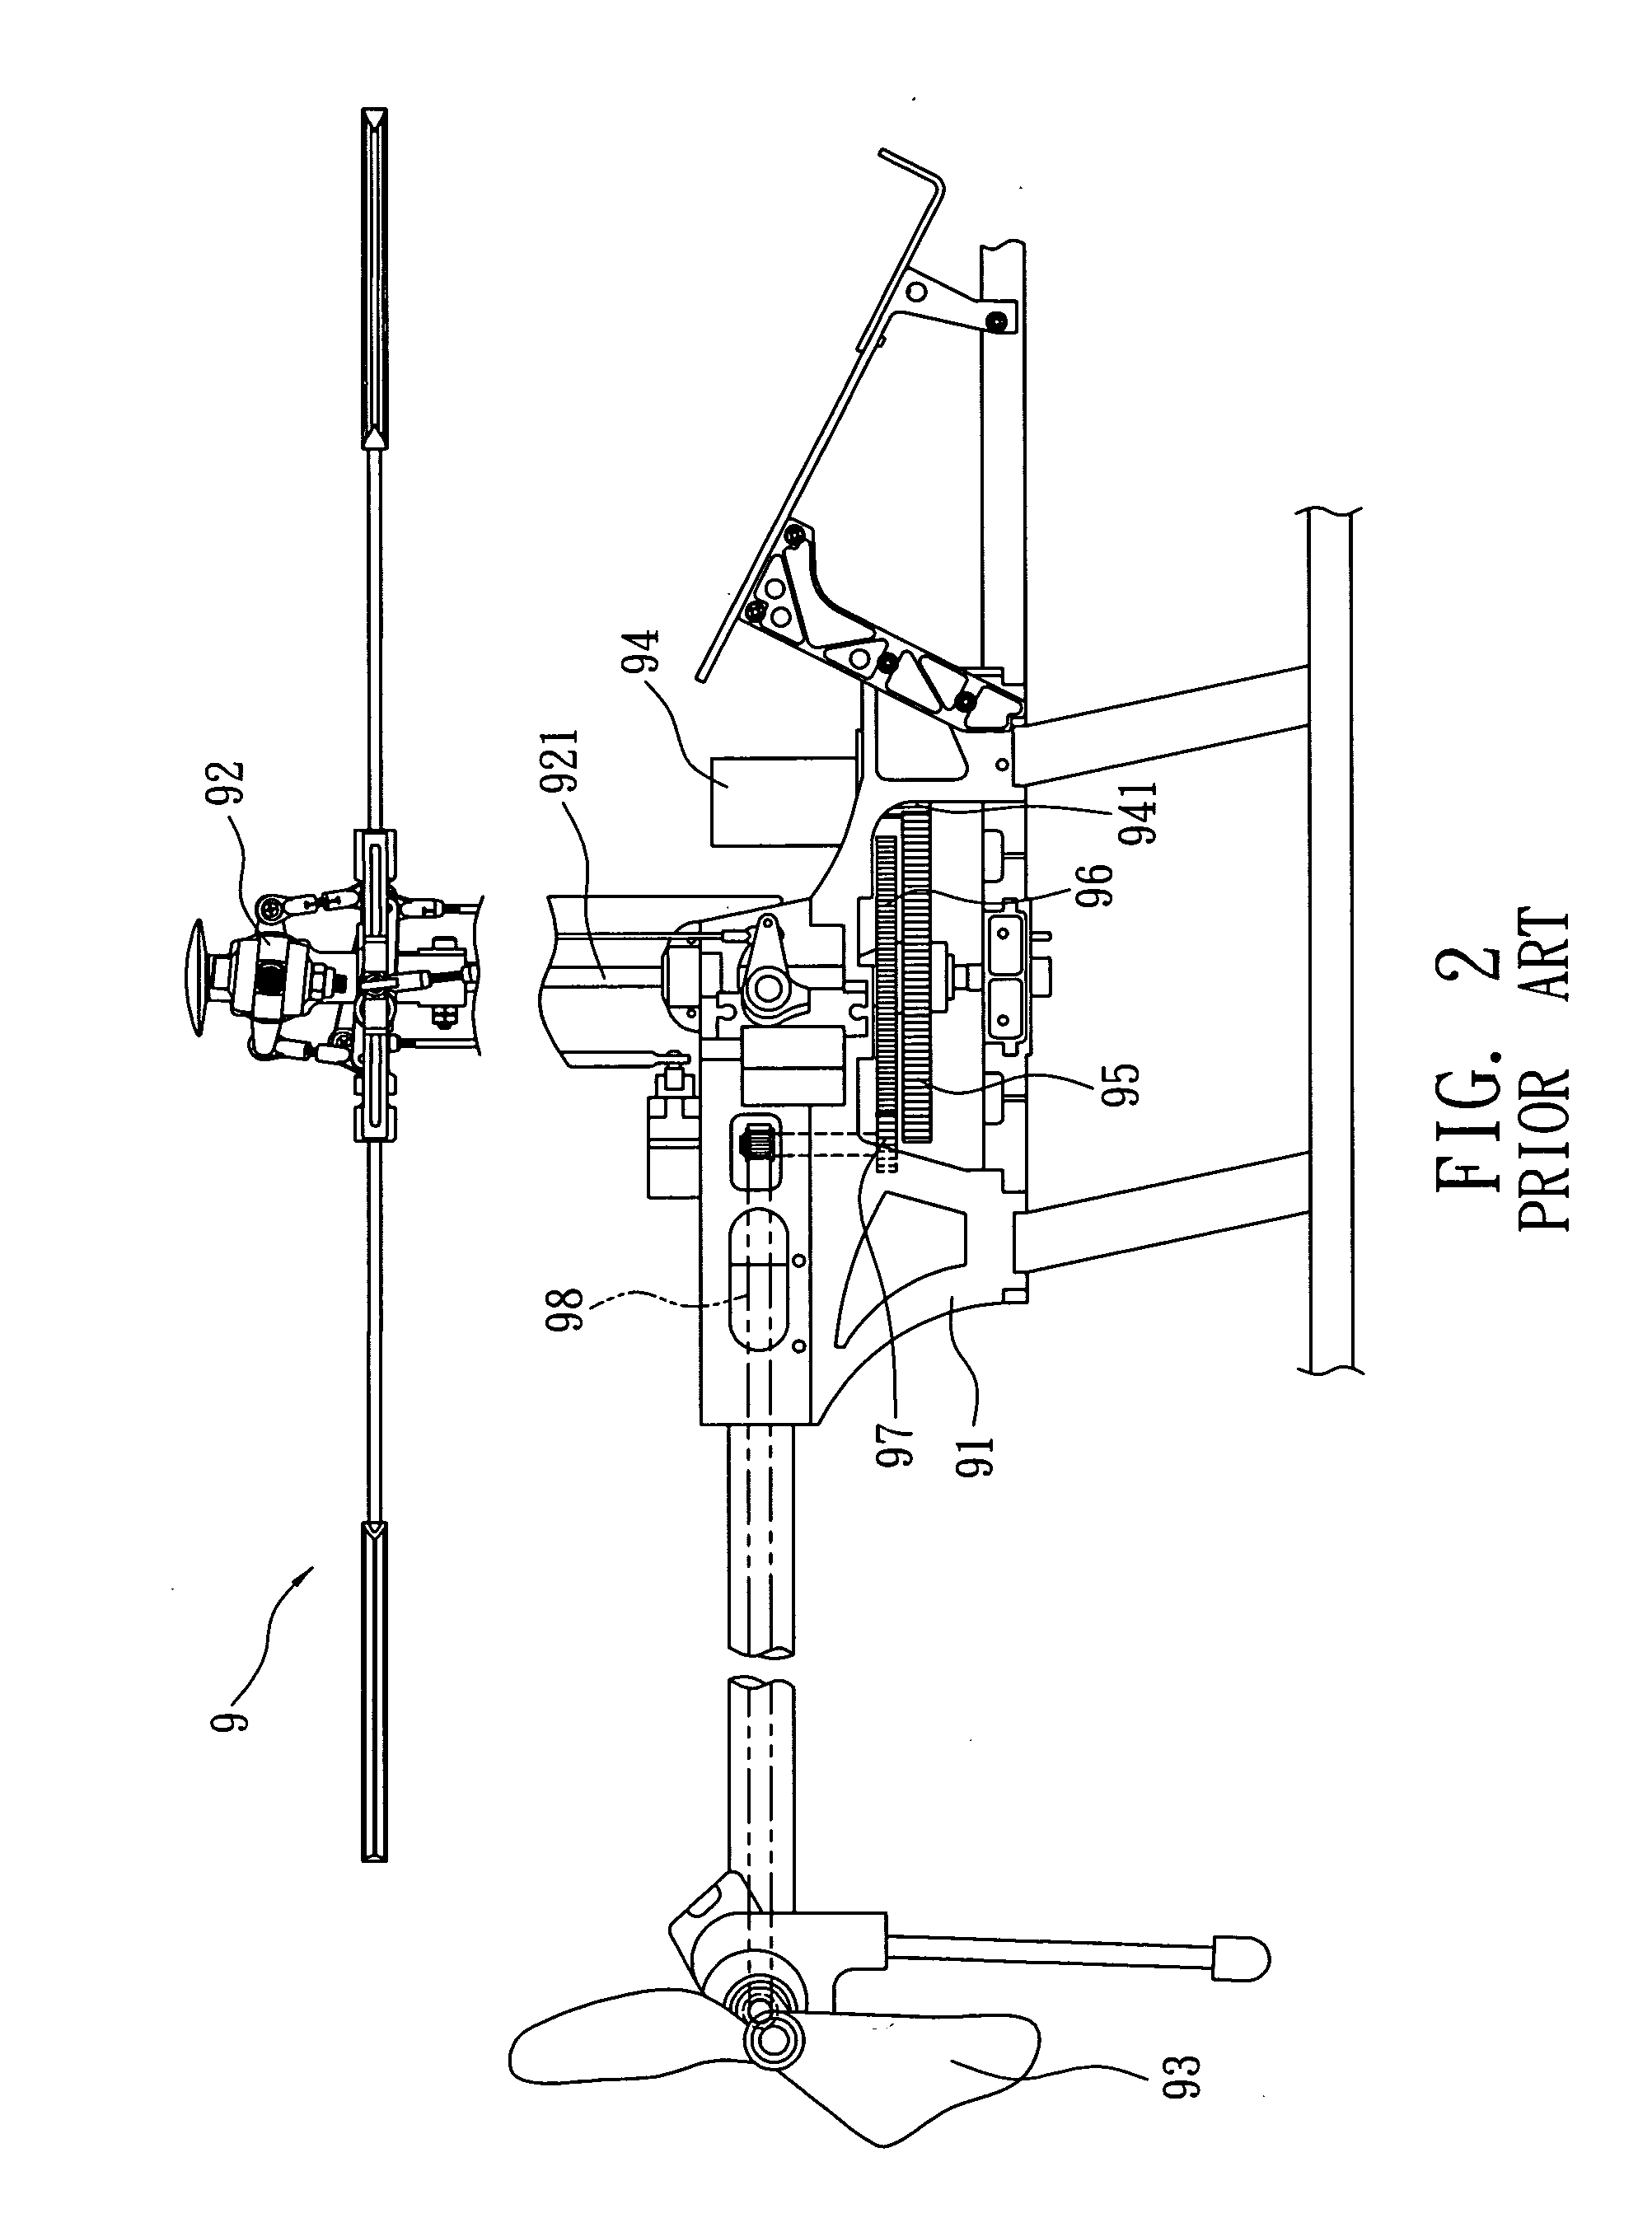 Power transmission system for an aircraft